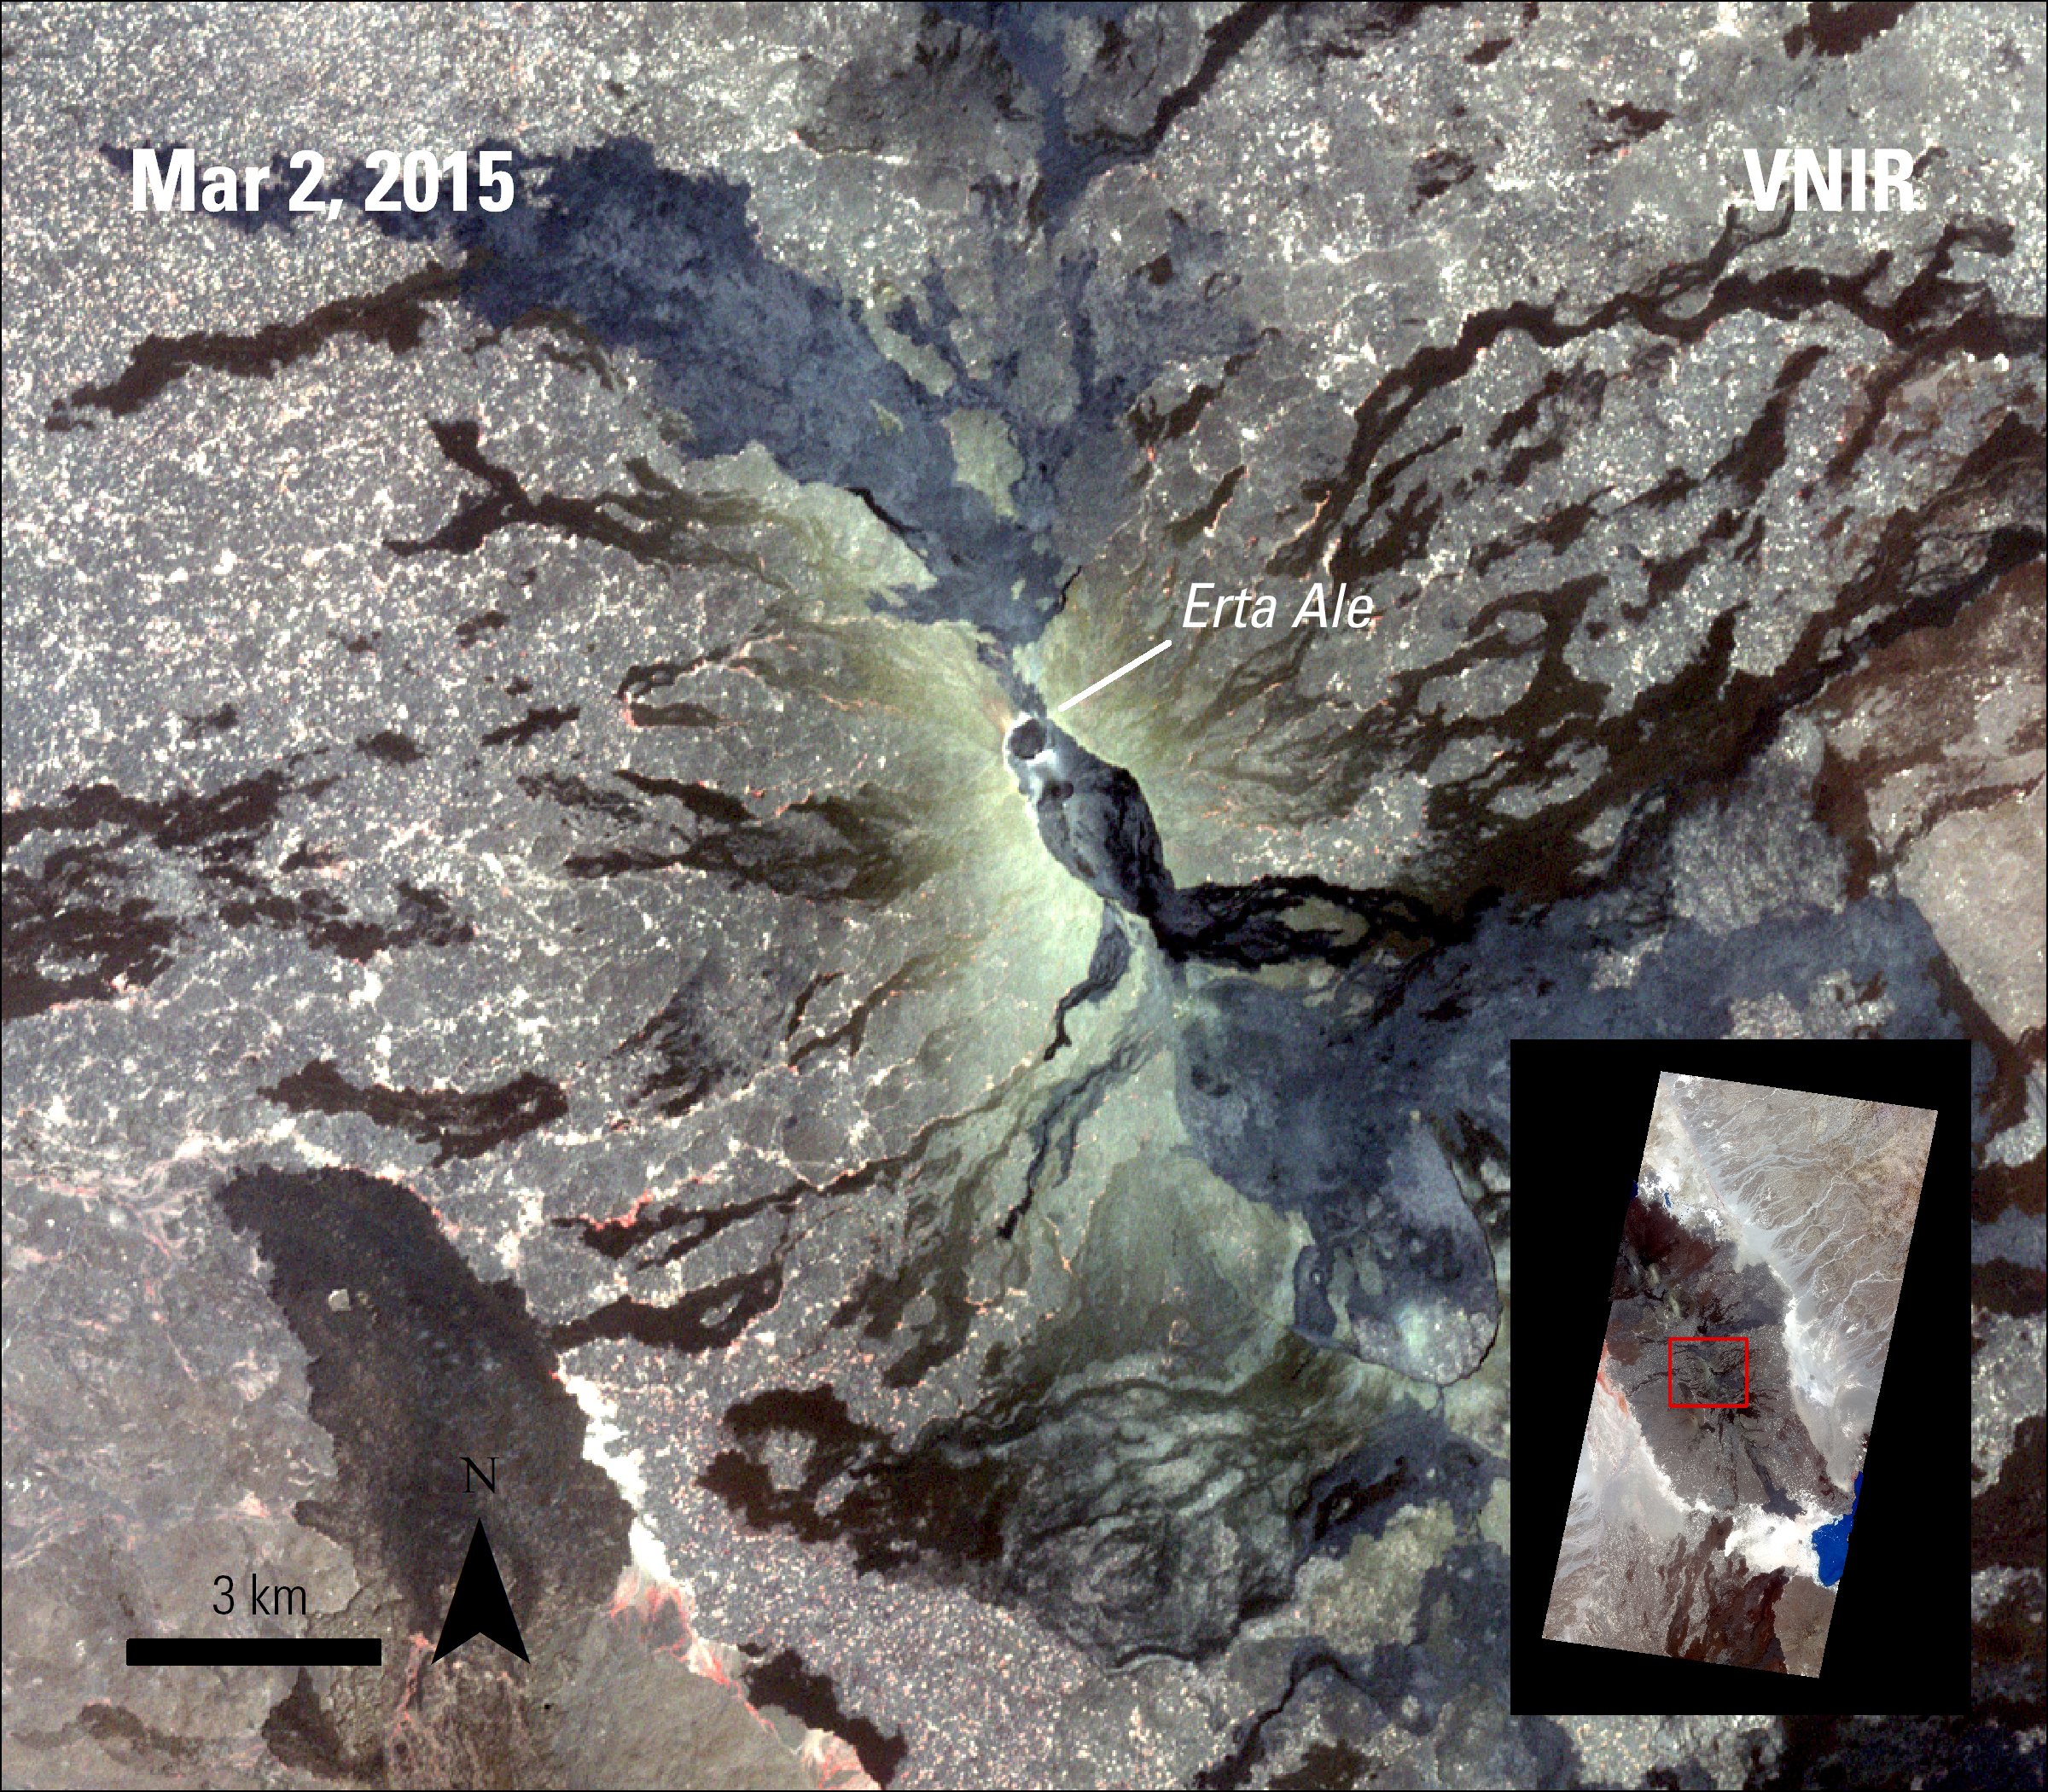 ASTER VNIR image, acquired on March 2, 2015 over Erta Ale, Ethiopia.